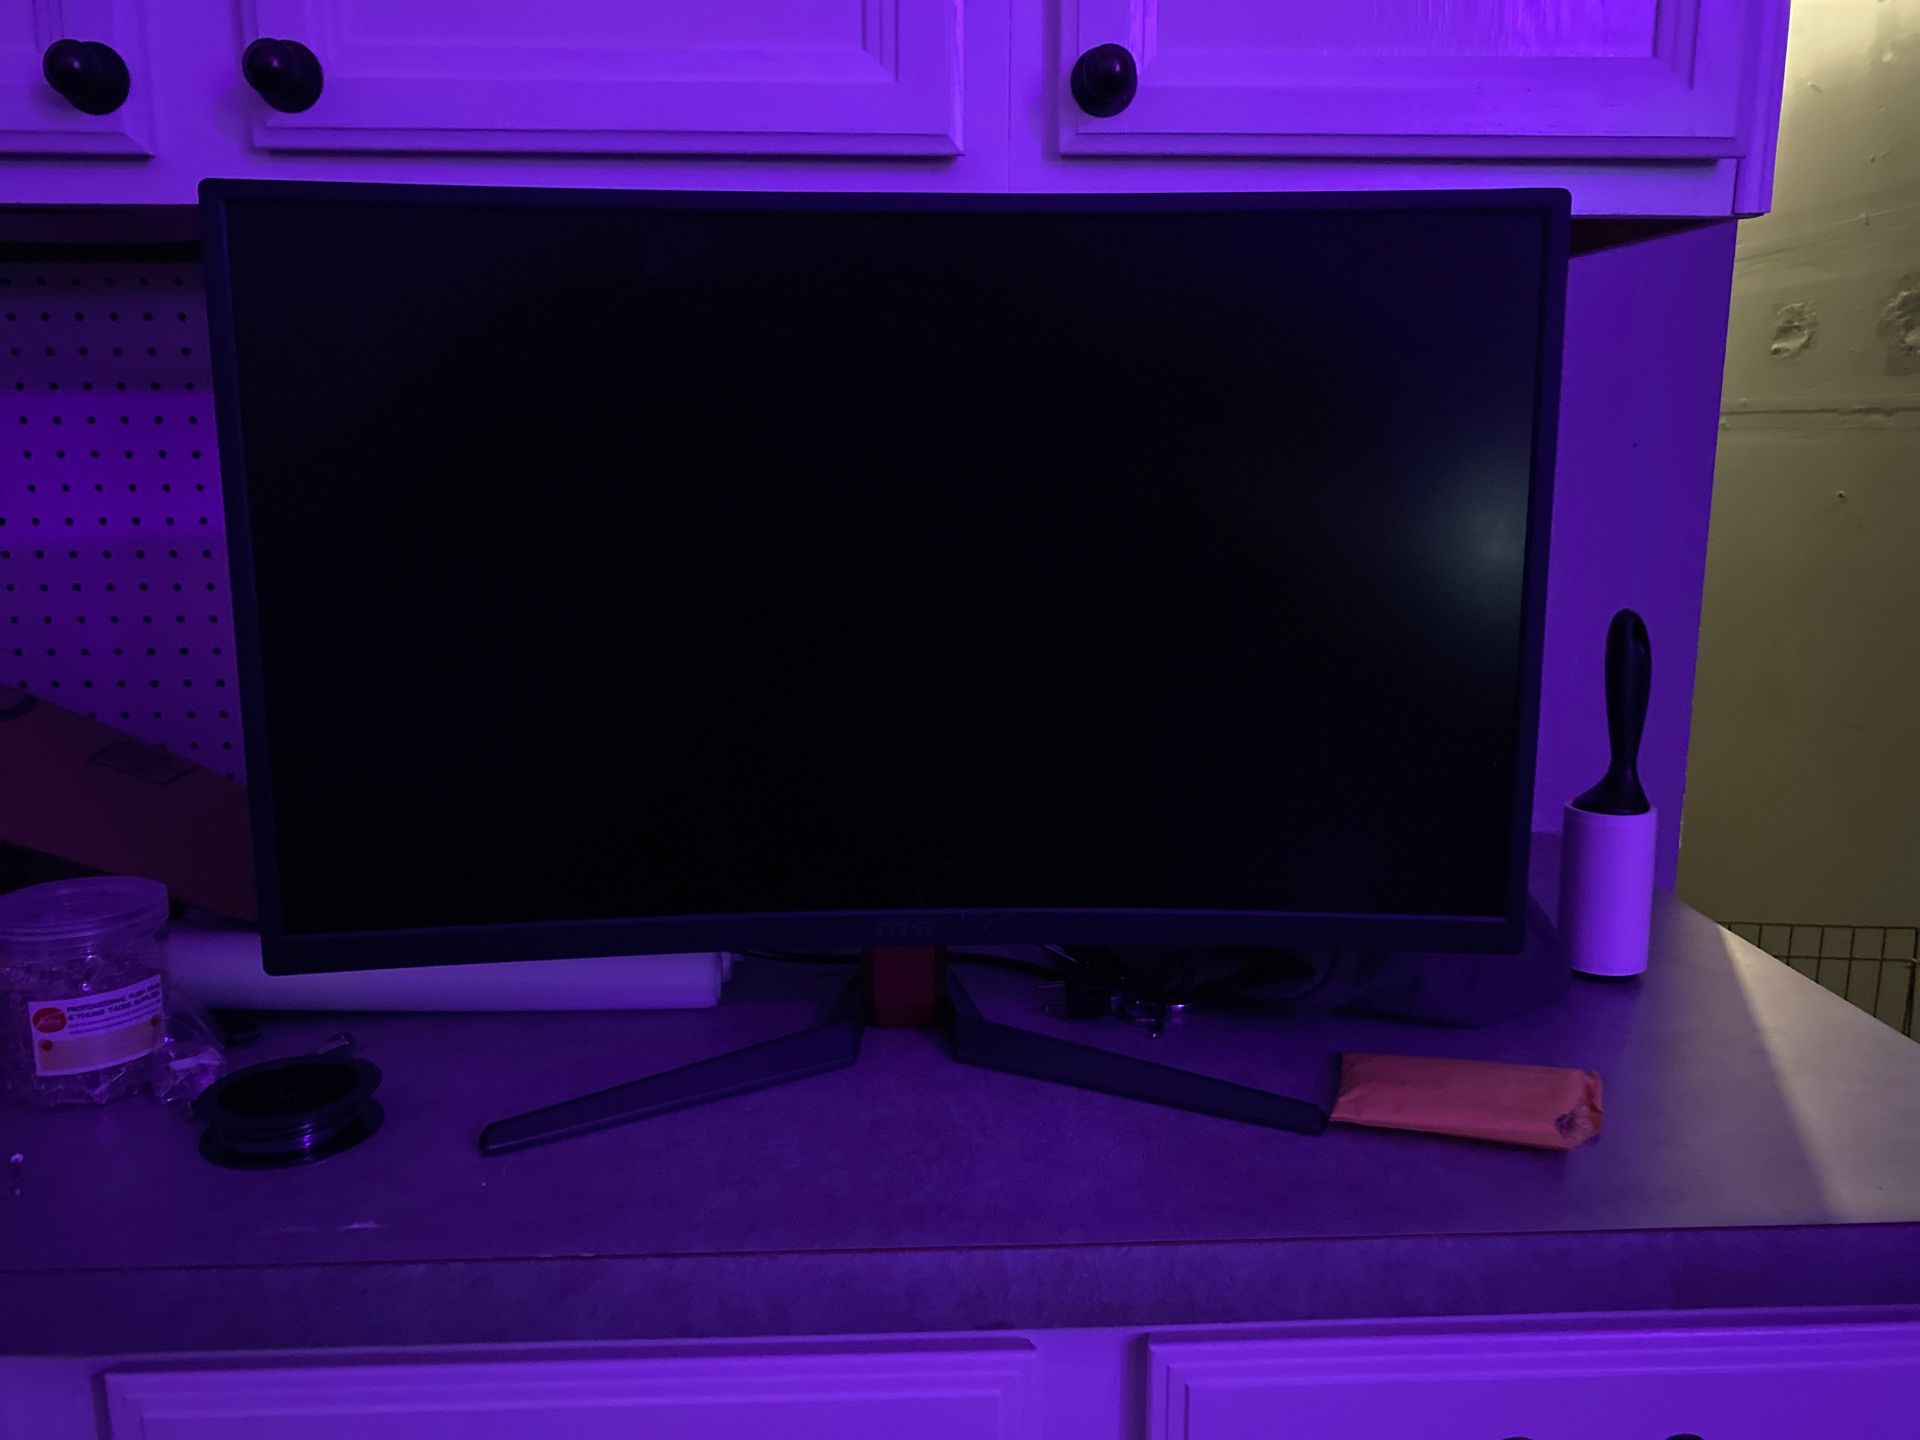 Curved 27in msi gaming monitor